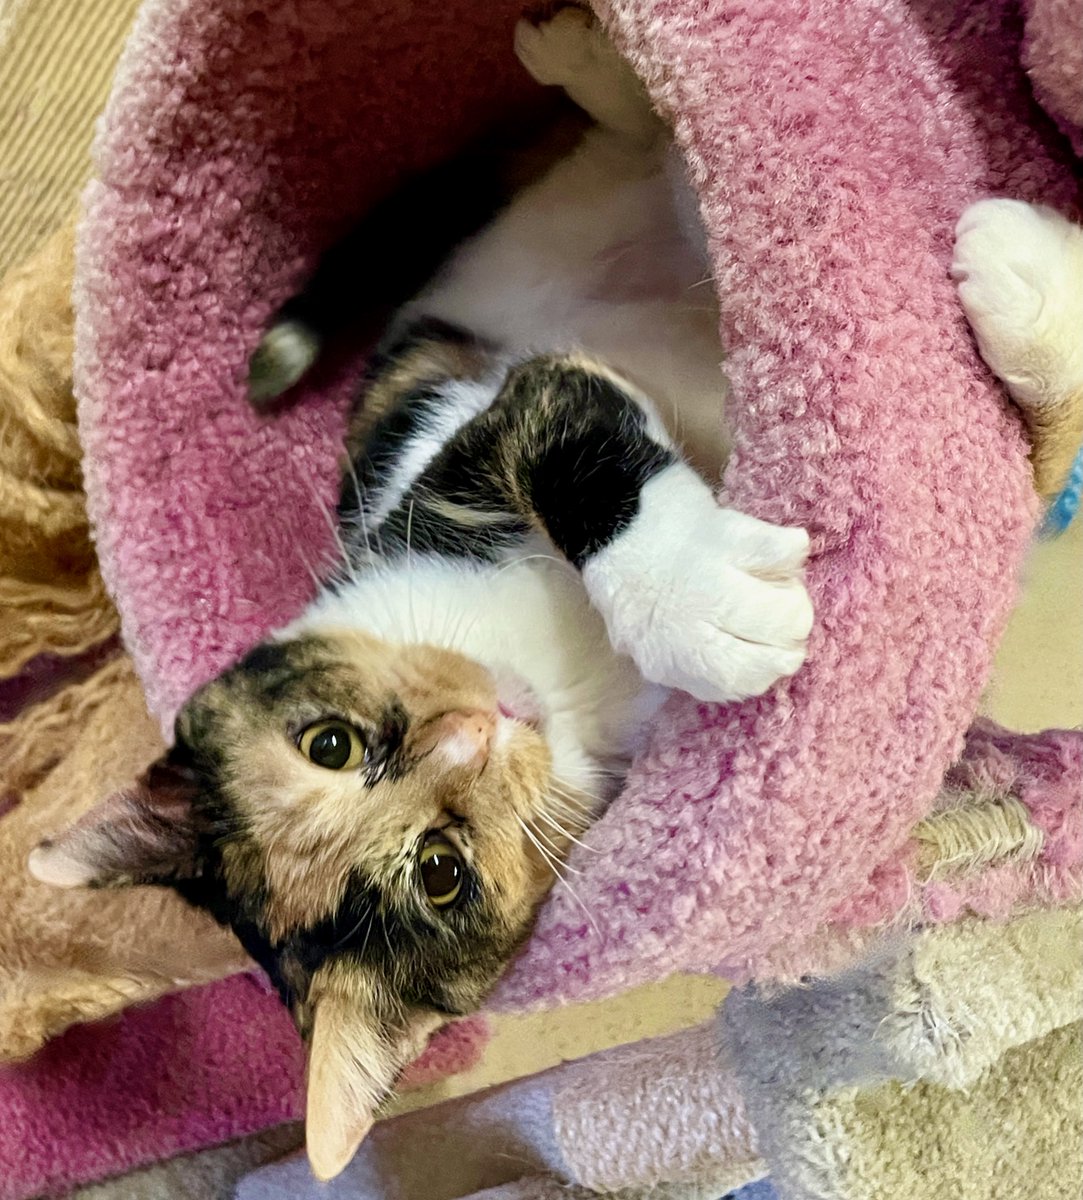 Margo is 3 but there are days her #kitten comes out! Then she loves to roll around in the cat tree & invite us to play! This beauty is ready for a home! #va #dc #noVA #virginia #caturday #washingtondc #maryland #cats #pets #SaturdayVibes #Saturday #CatsOfTwitter #GoodVibes #cute